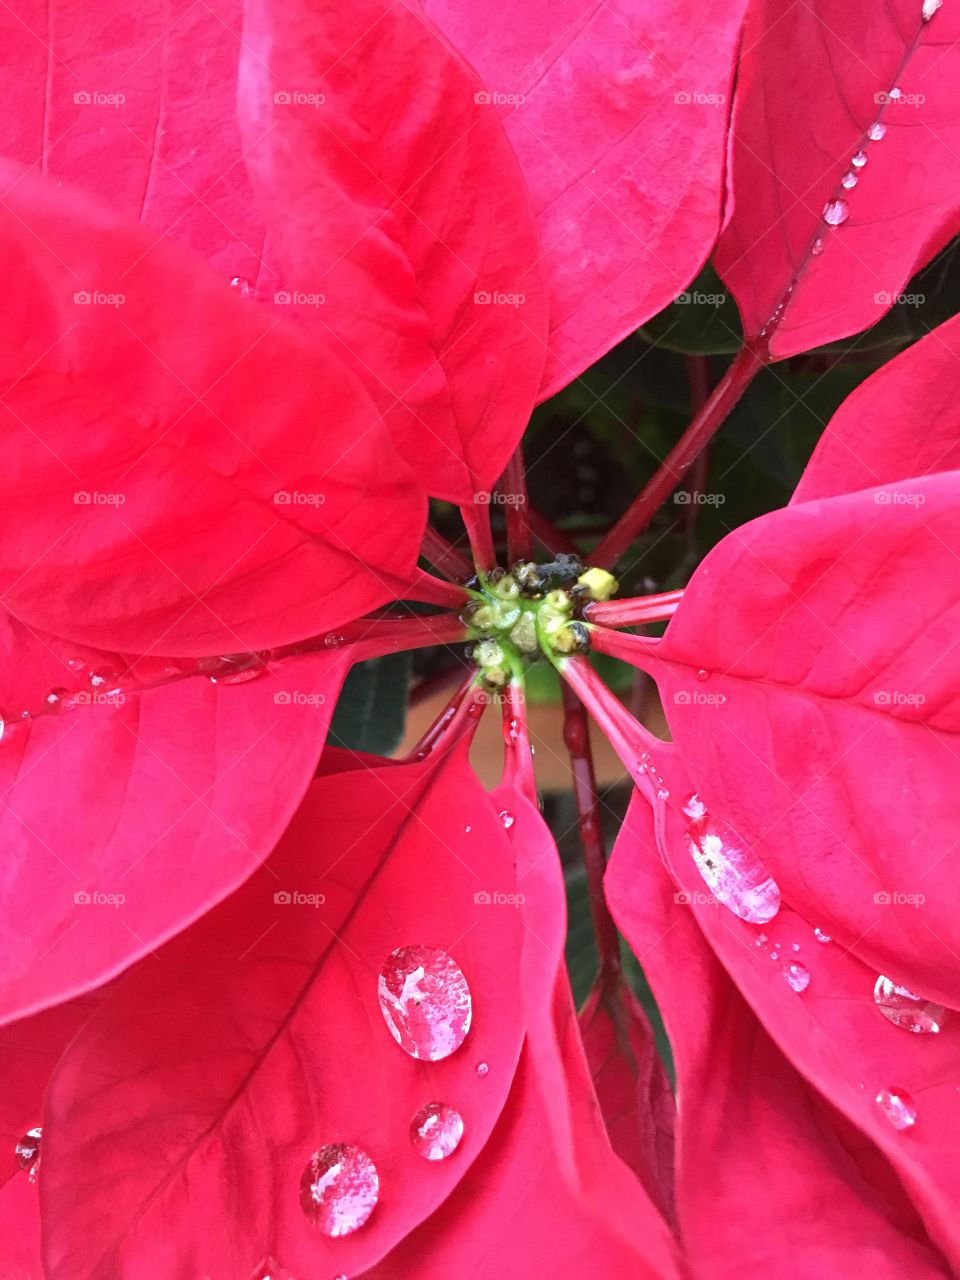 Poinsettia with morning dew